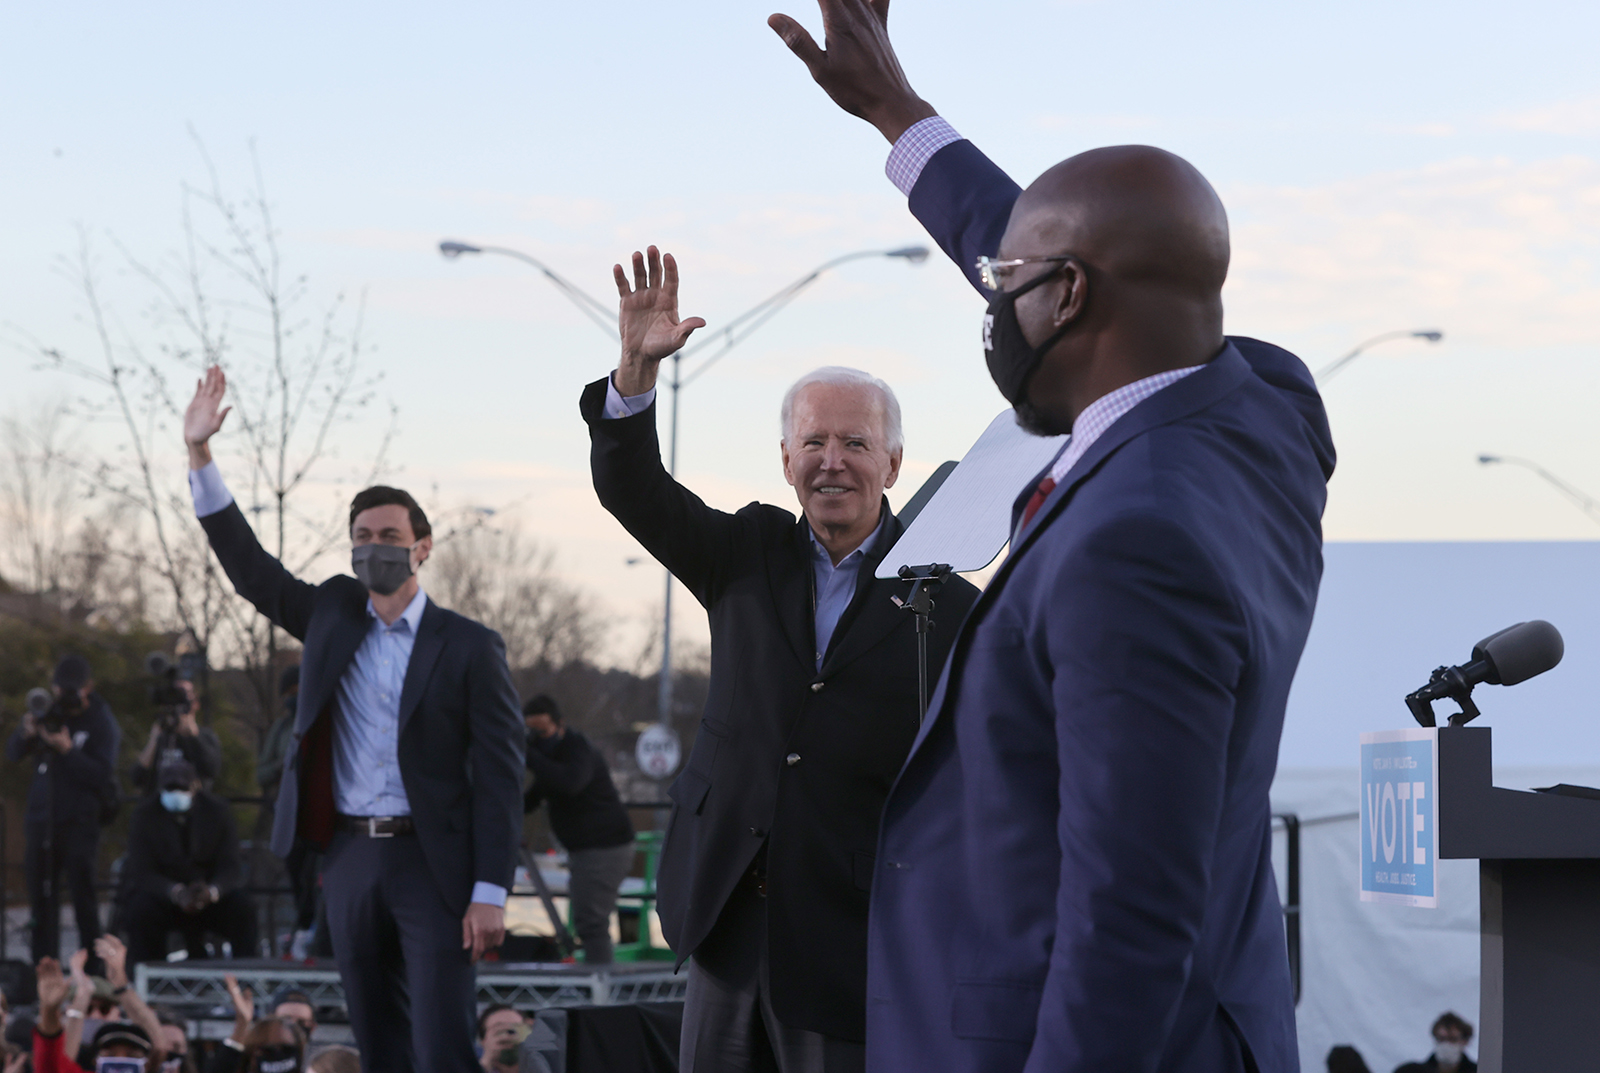 President-elect Joe Biden, center, along with democratic candidates for the U.S. Senate Jon Ossoff, left, and Rev. Raphael Warnock, greet supporters during a campaign rally the day before their runoff election in the parking lot of Centerparc Stadium on Monday, Jan. 4, 2021, in Atlanta, Georgia. (Chip Somodevilla/Getty Images/TNS)